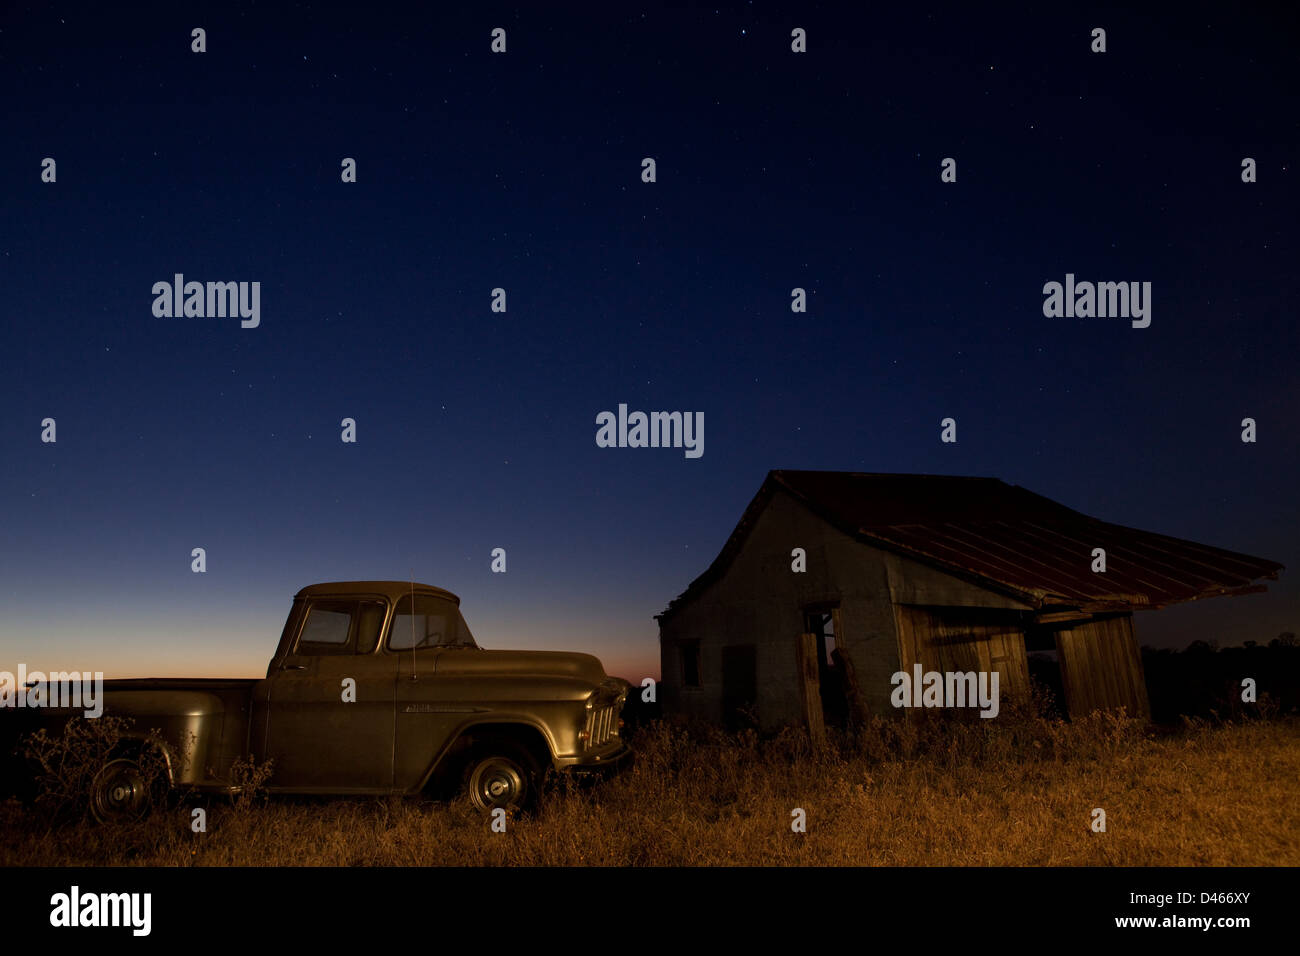 Old Farm Truck and Abandoned House on a farm at night in Texas, USA Stock Photo